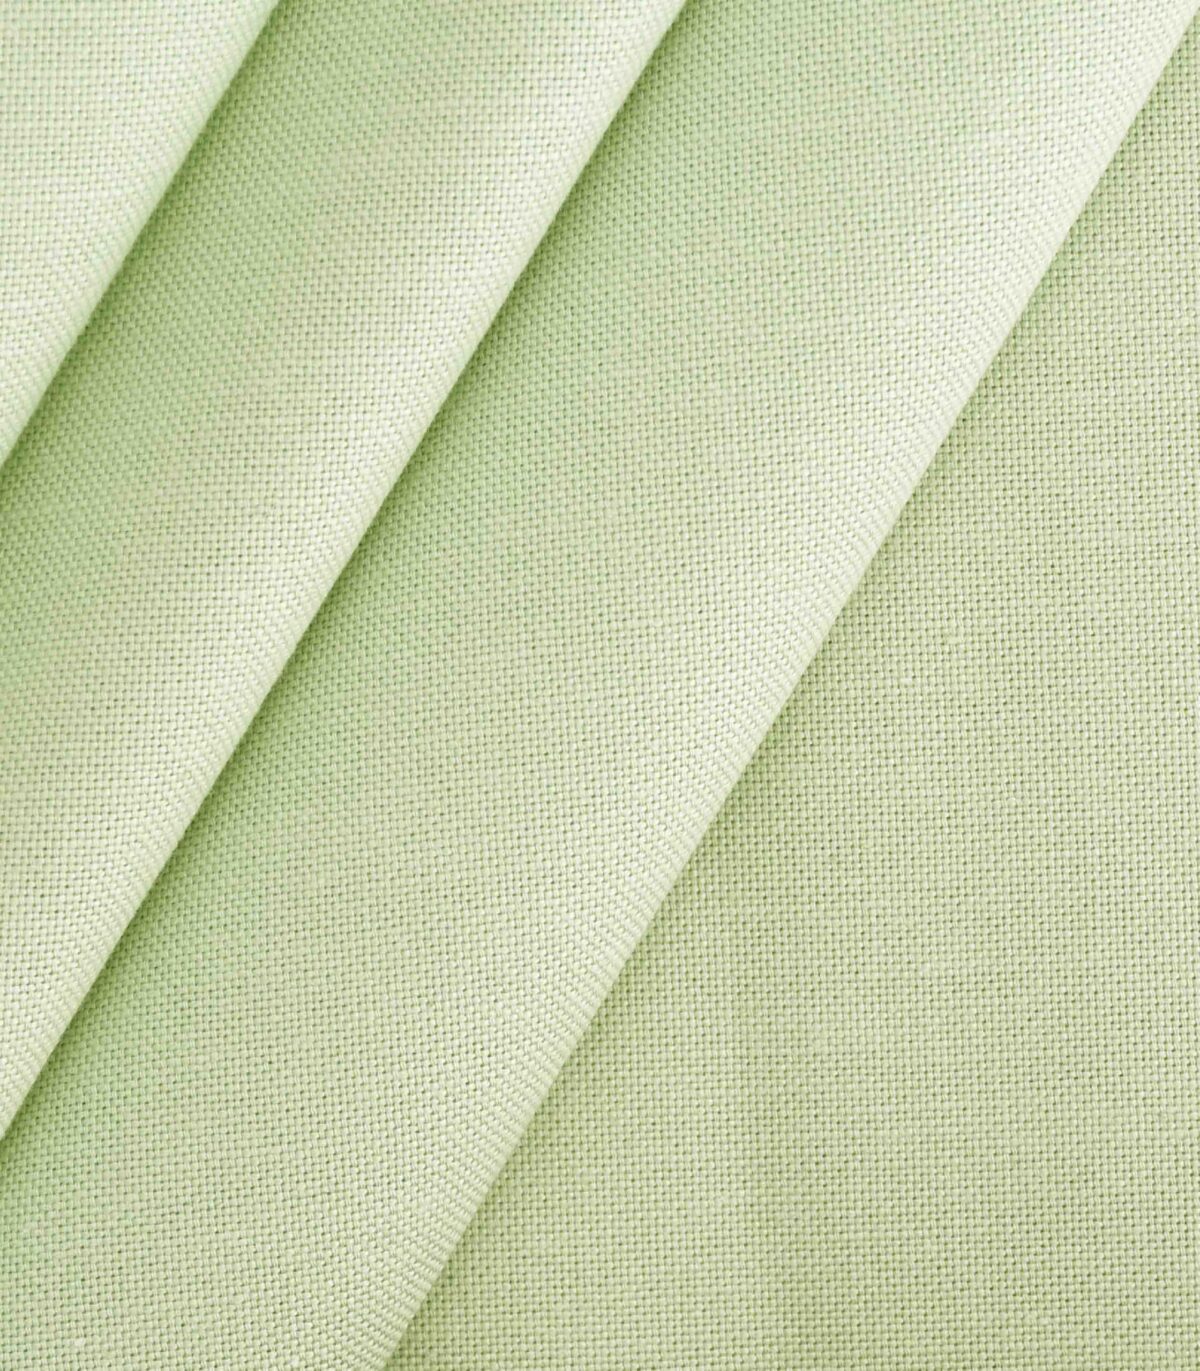 Cotton Light Green Dyed Woven Fabric